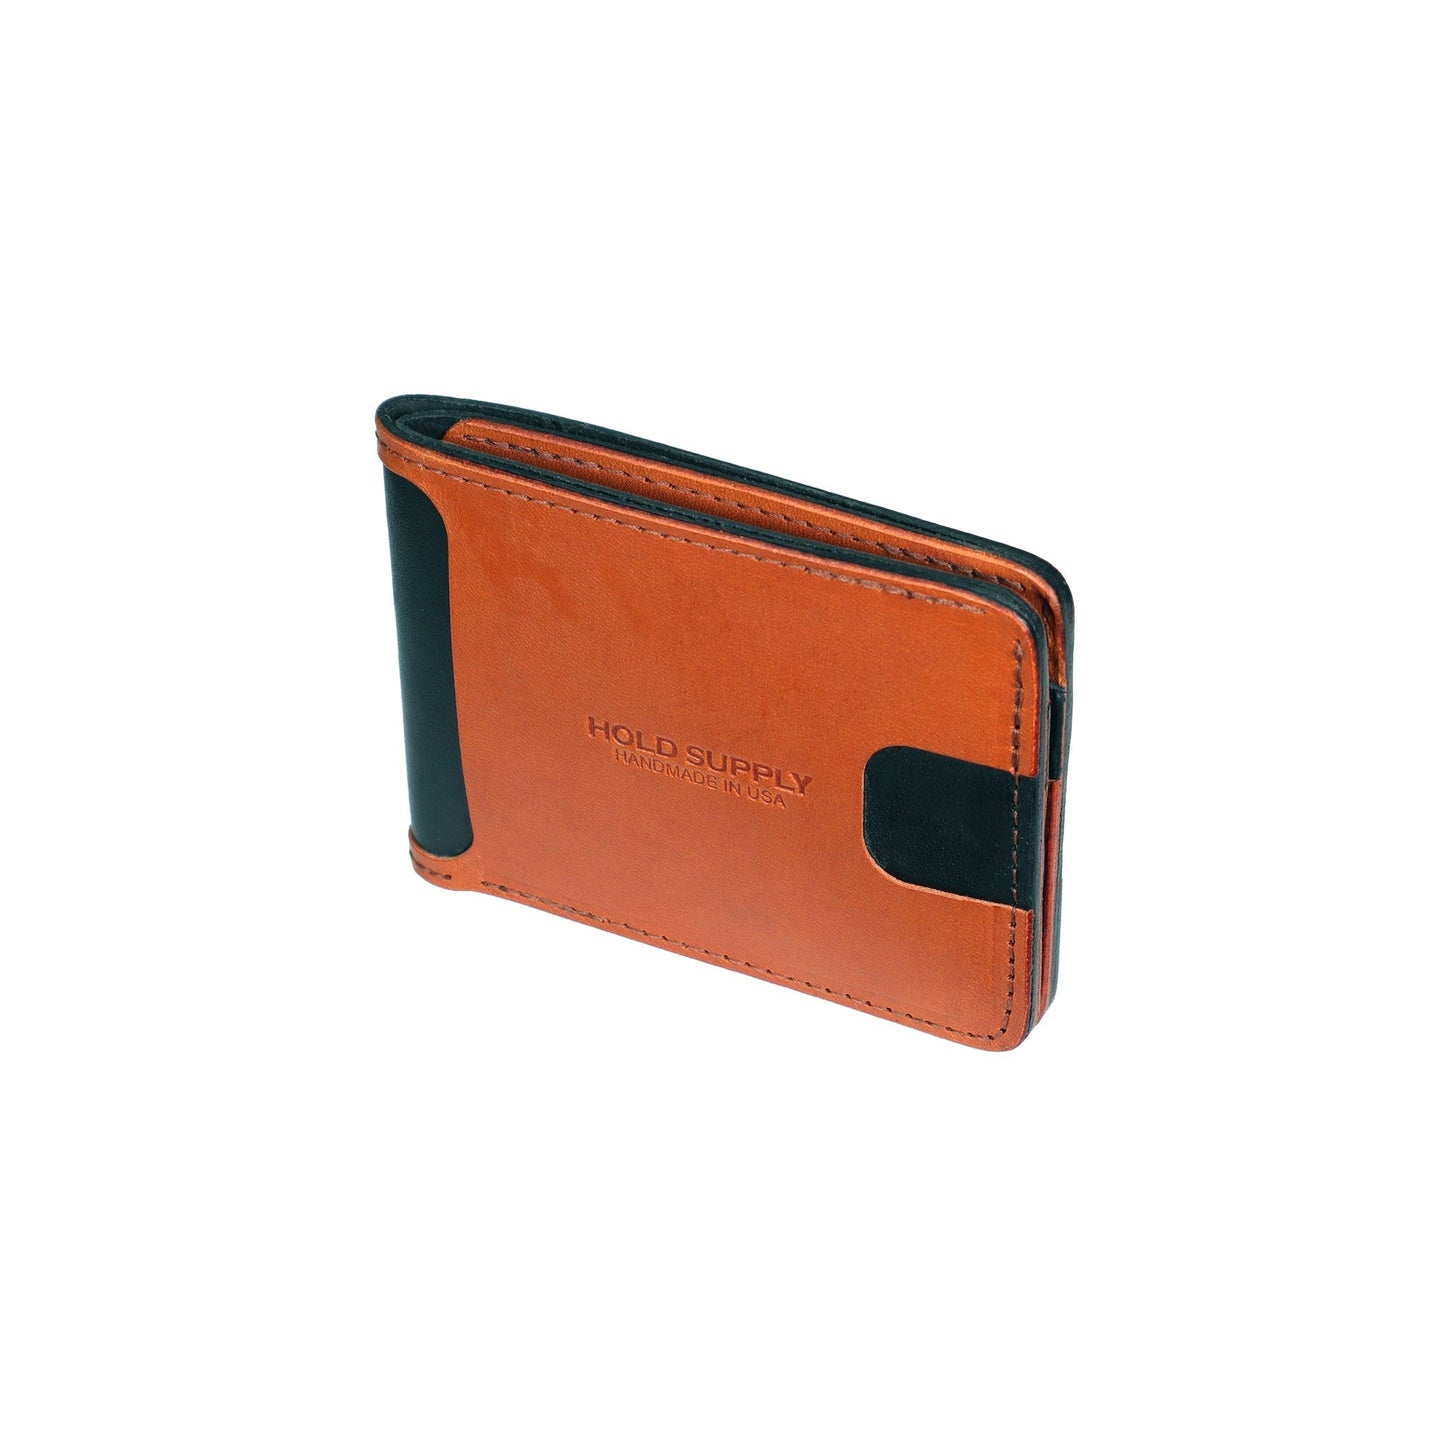 Black and Brown Men's Leather Bifold Wallet